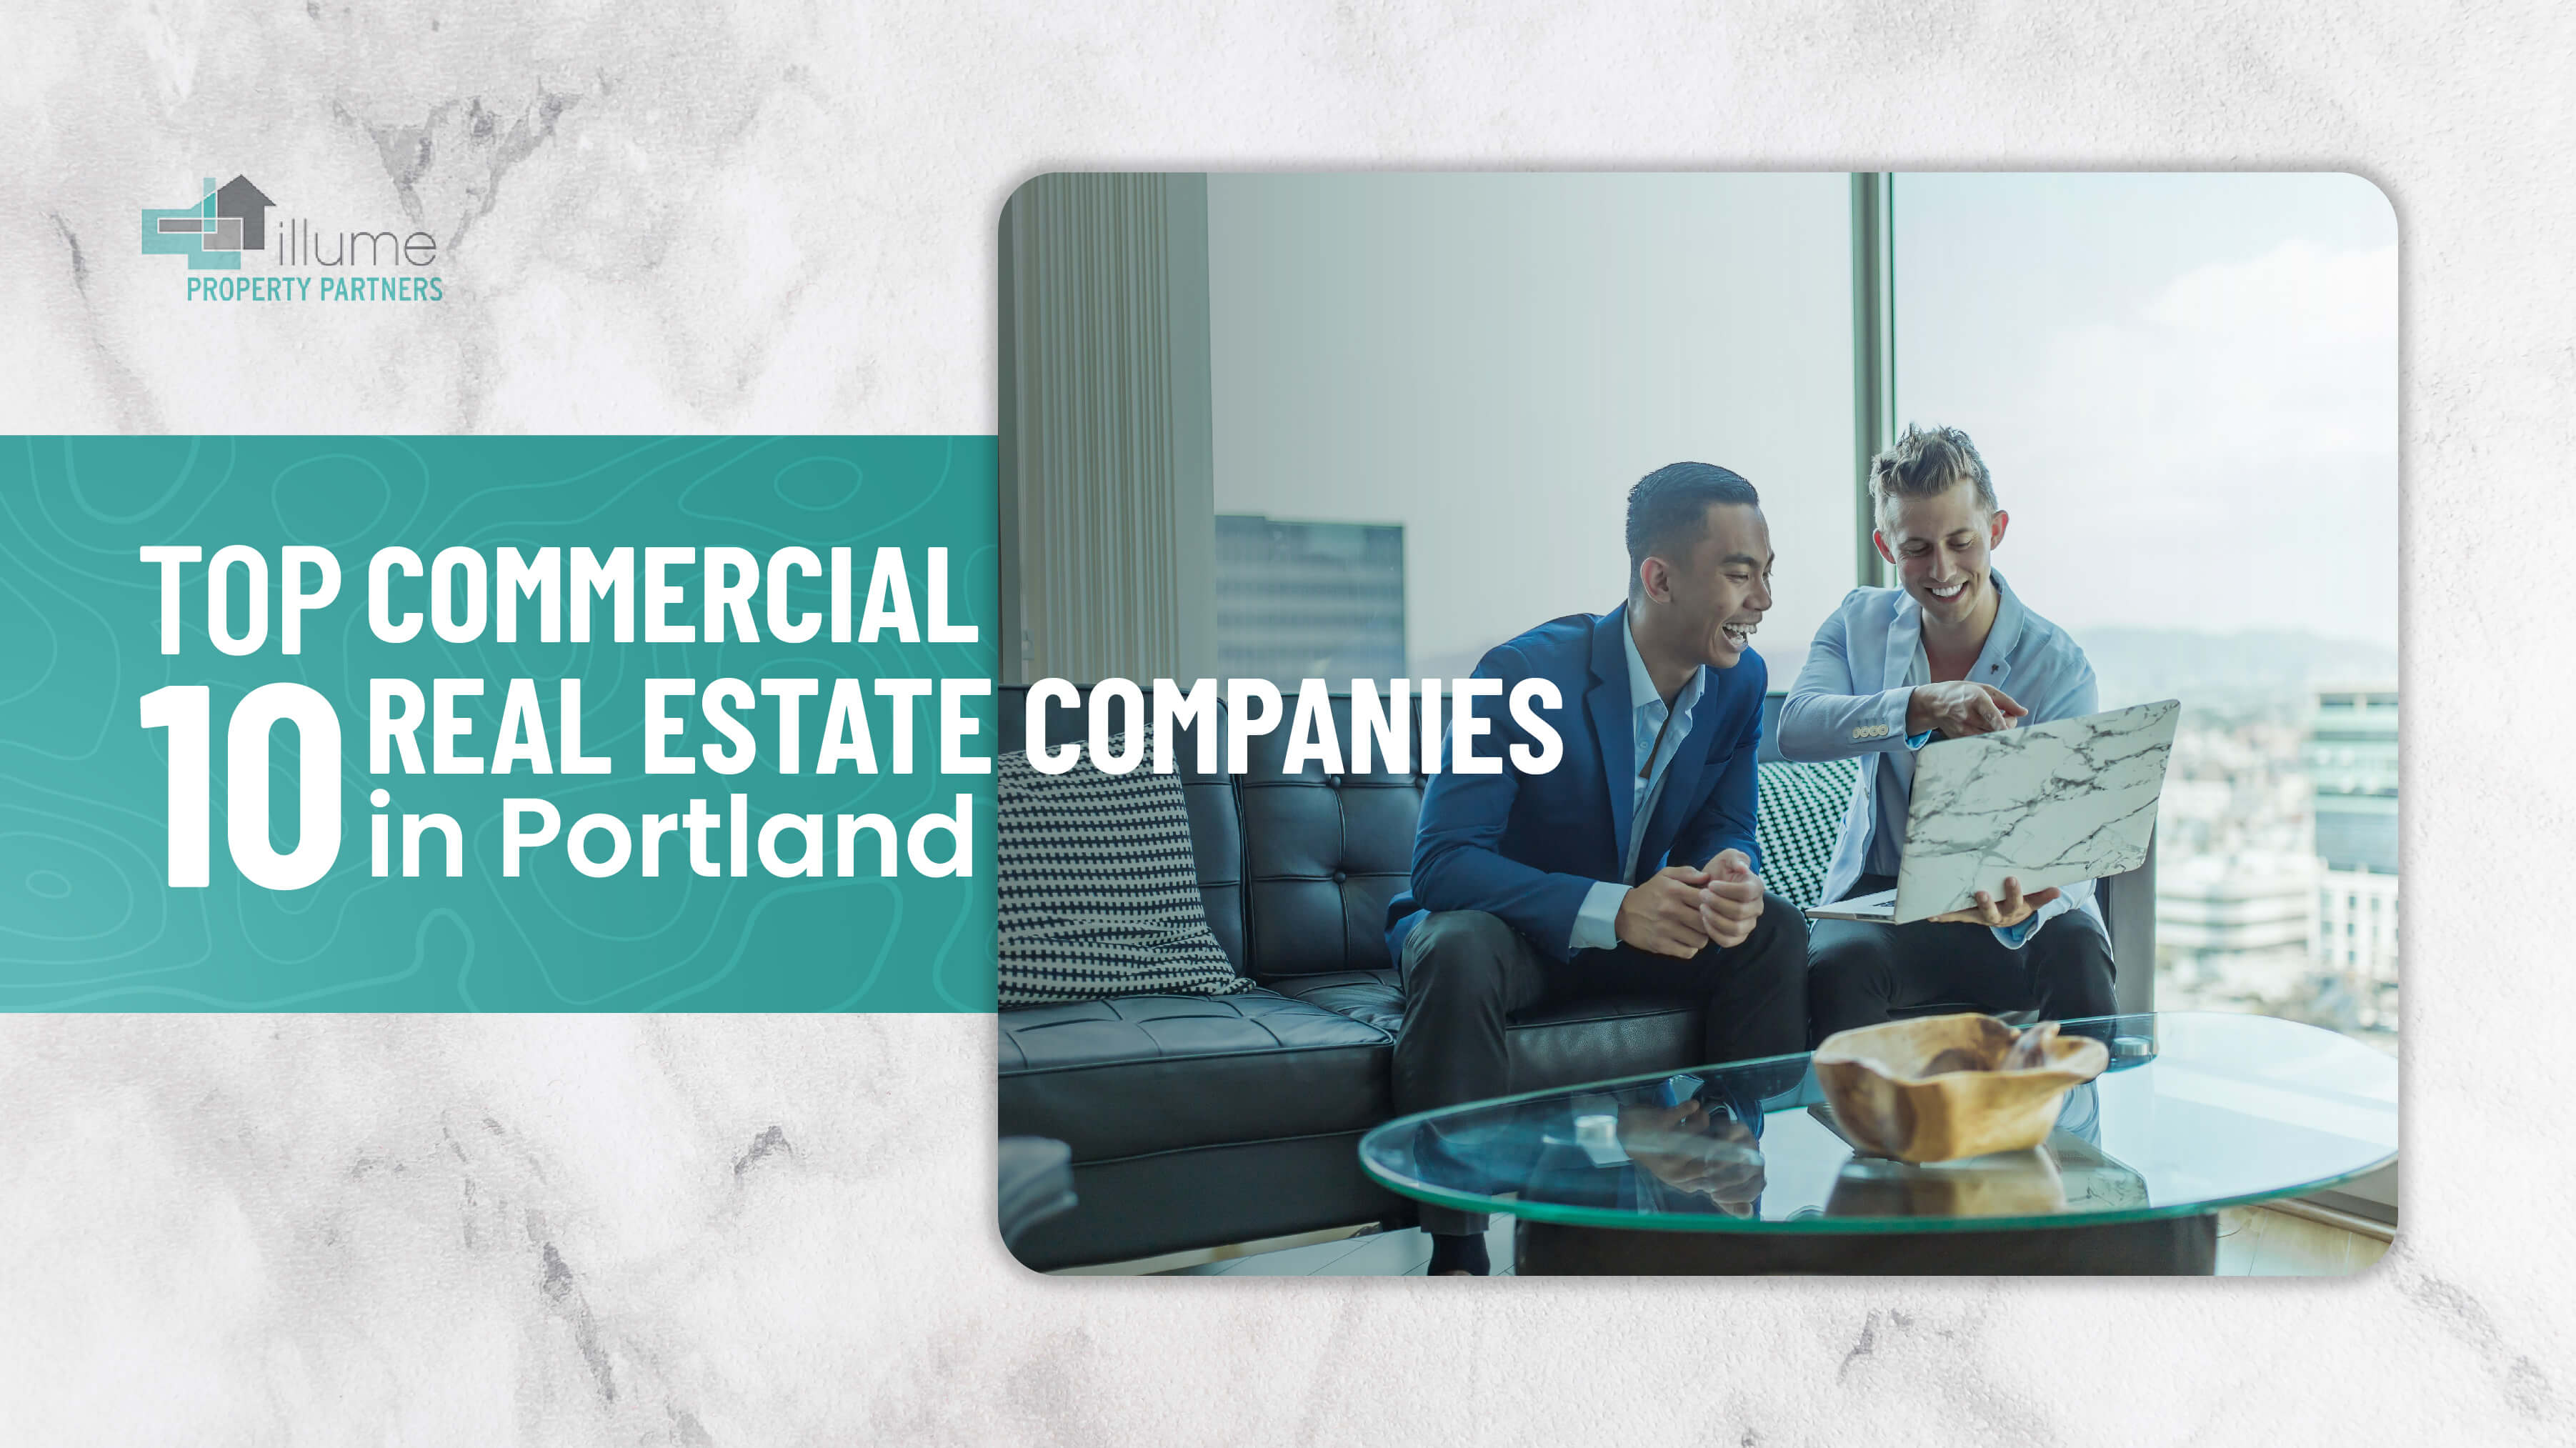 Top 10 Commercial Real Estate Companies in Portland